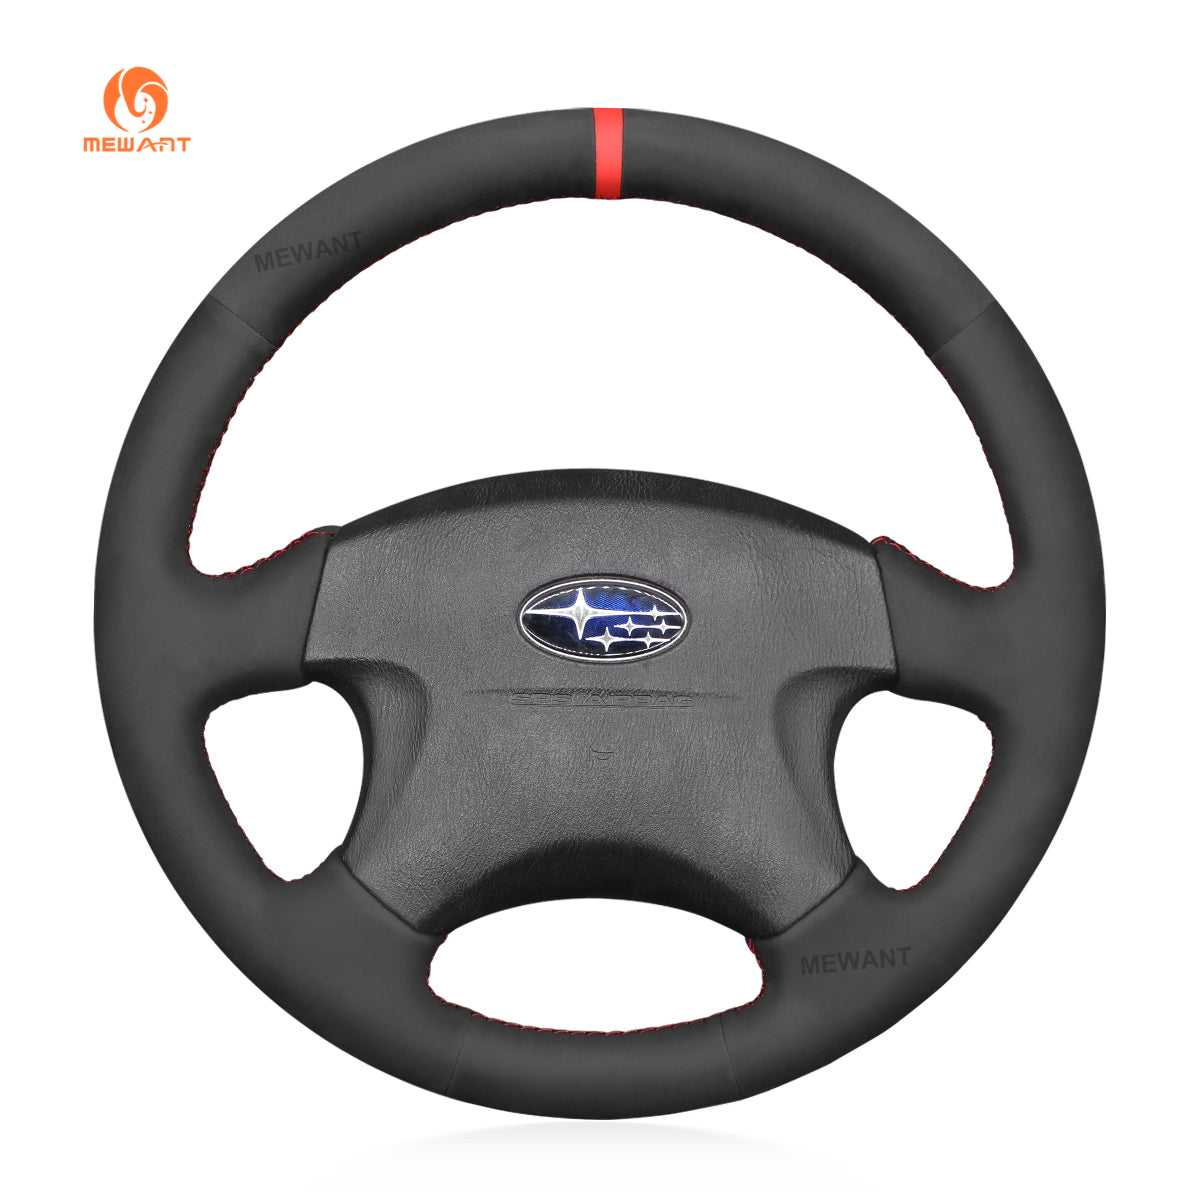 MEWANT Black Leather Suede Car Steering Wheel Cover for Subaru Forester Impreza Legacy Outback Baja